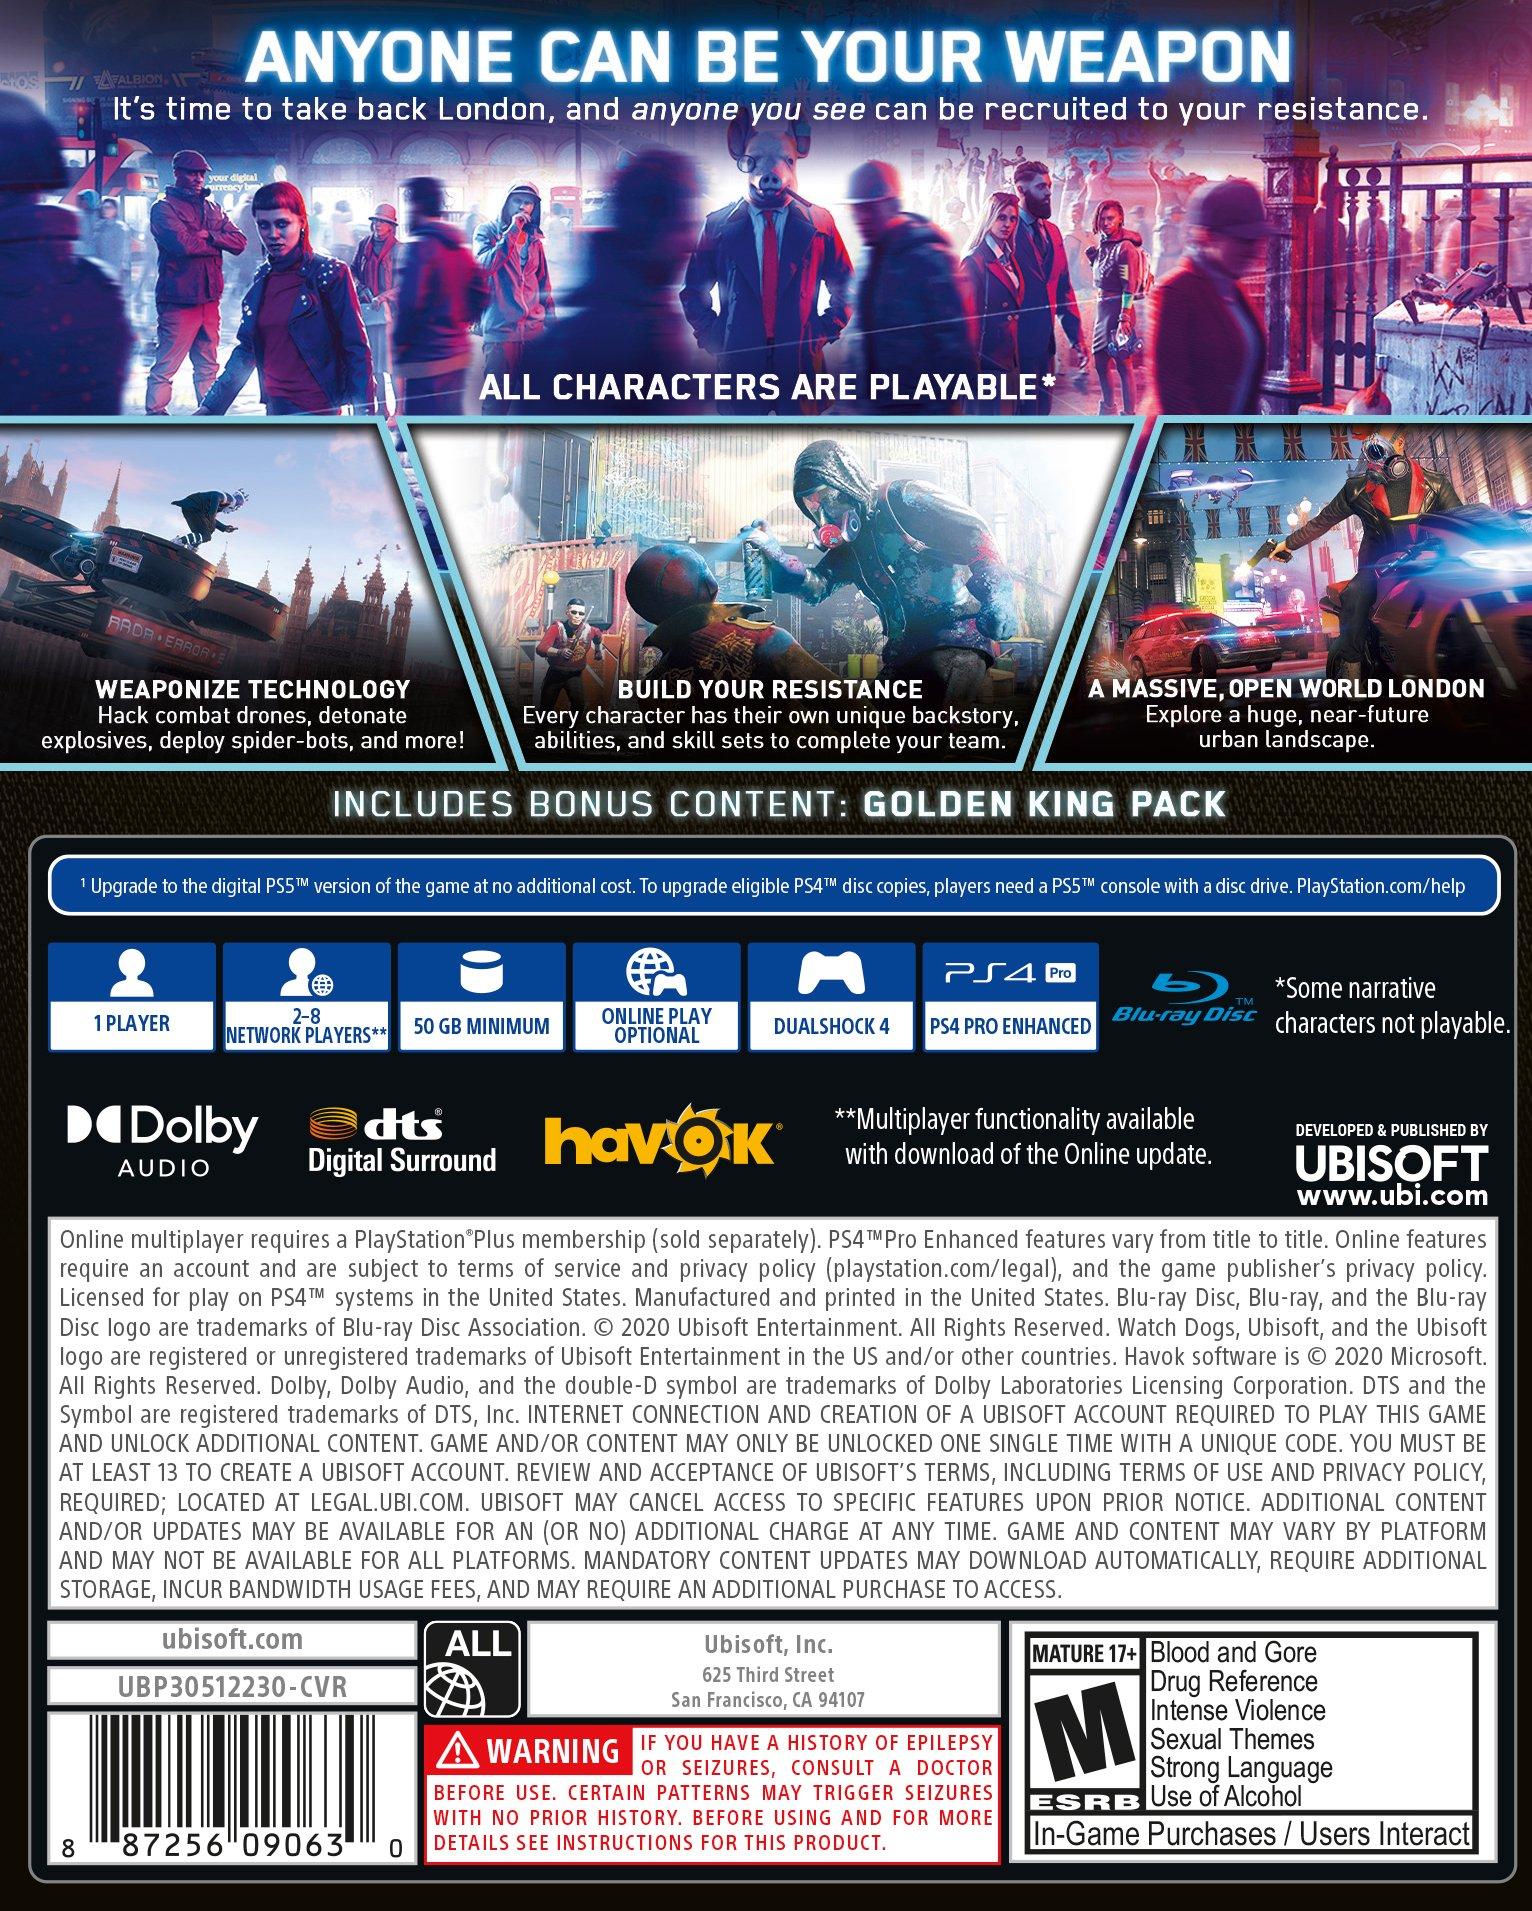 Watch Dogs®: Legion Now Available